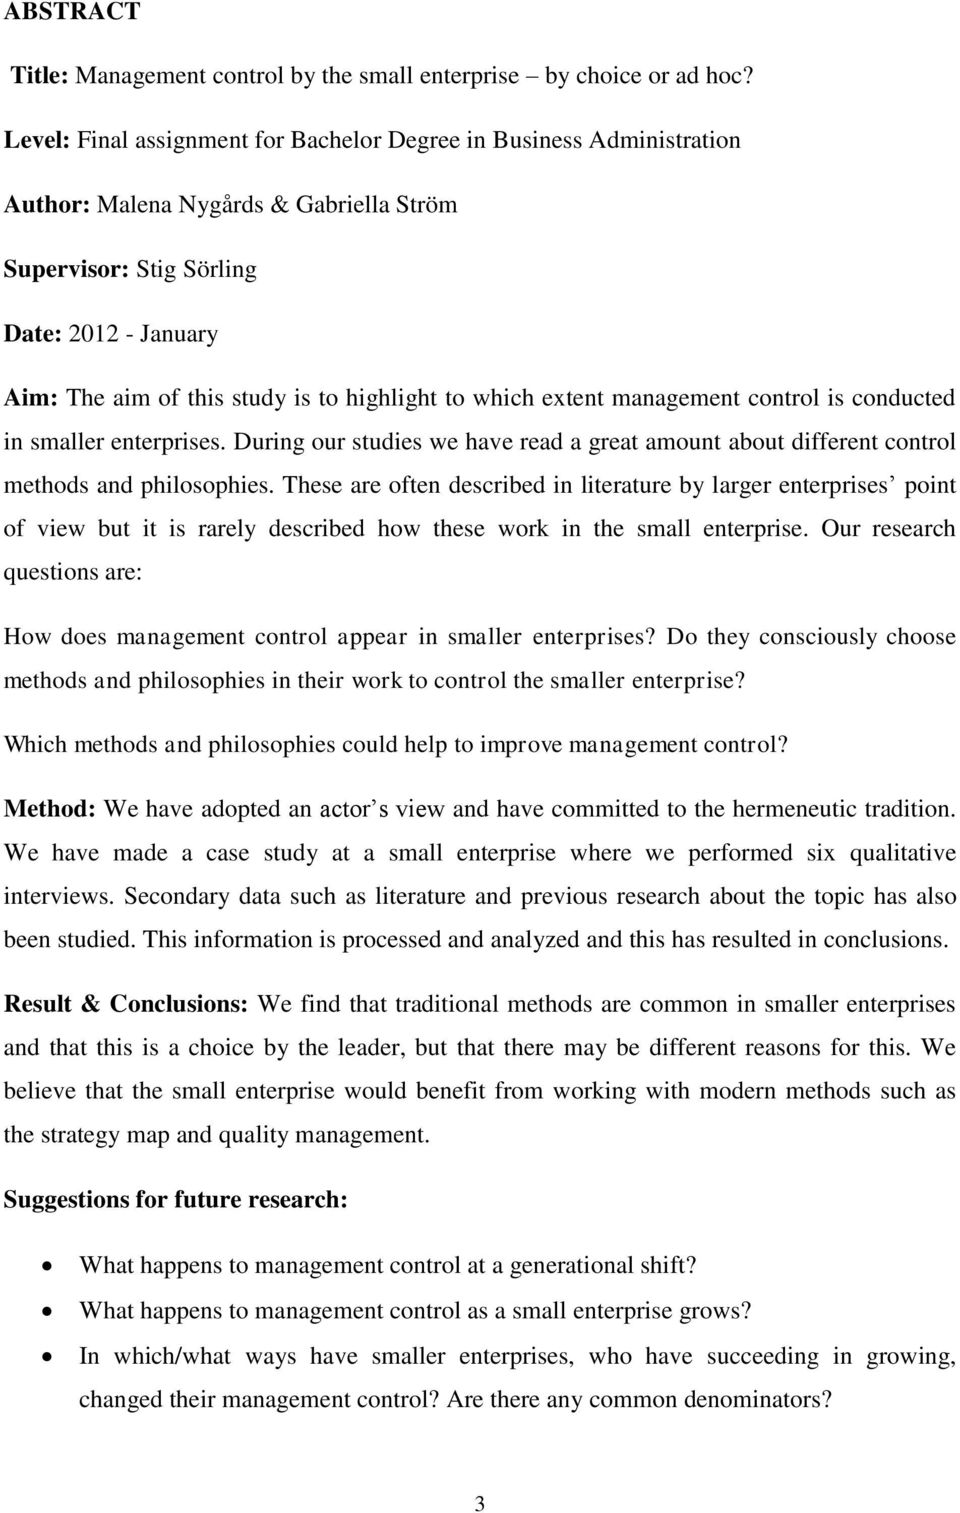 highlight to which extent management control is conducted in smaller enterprises. During our studies we have read a great amount about different control methods and philosophies.